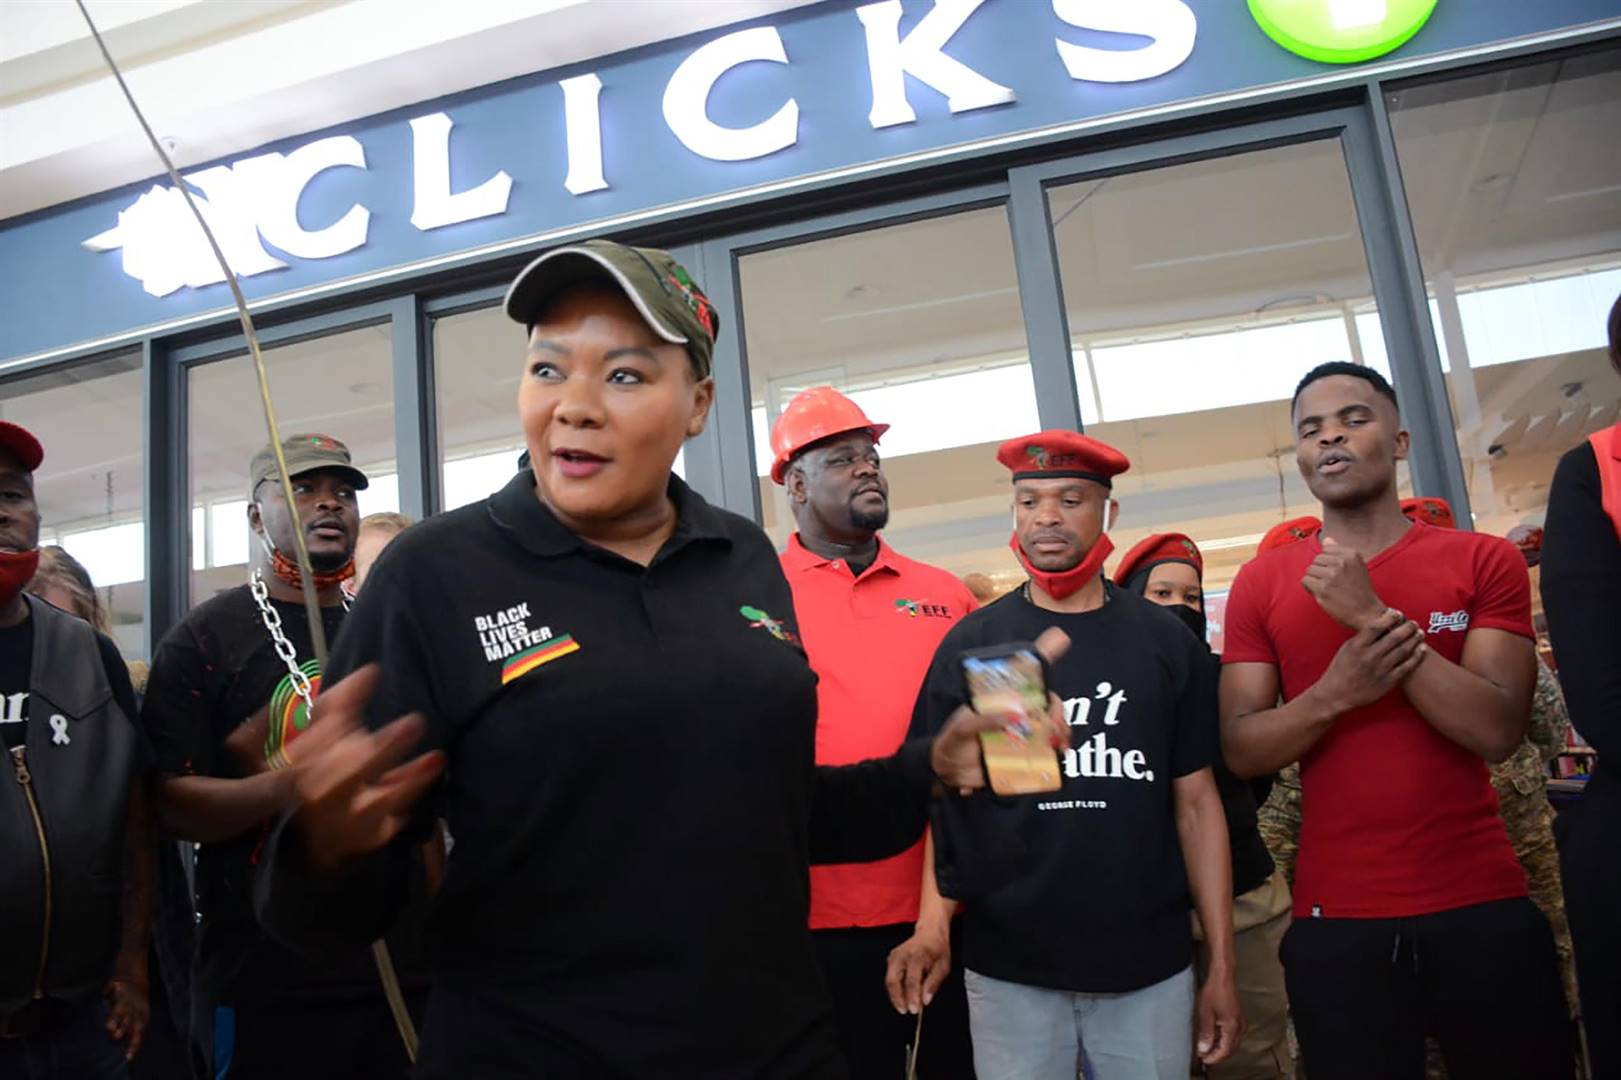 EEF treasure general Omphile Maotwe led the EEF protest outside the Clicks outlet in Menlyn Mall after the offensive and racist advert by Clicks that undermined the dignity of black people. Photo by Raymond Morare